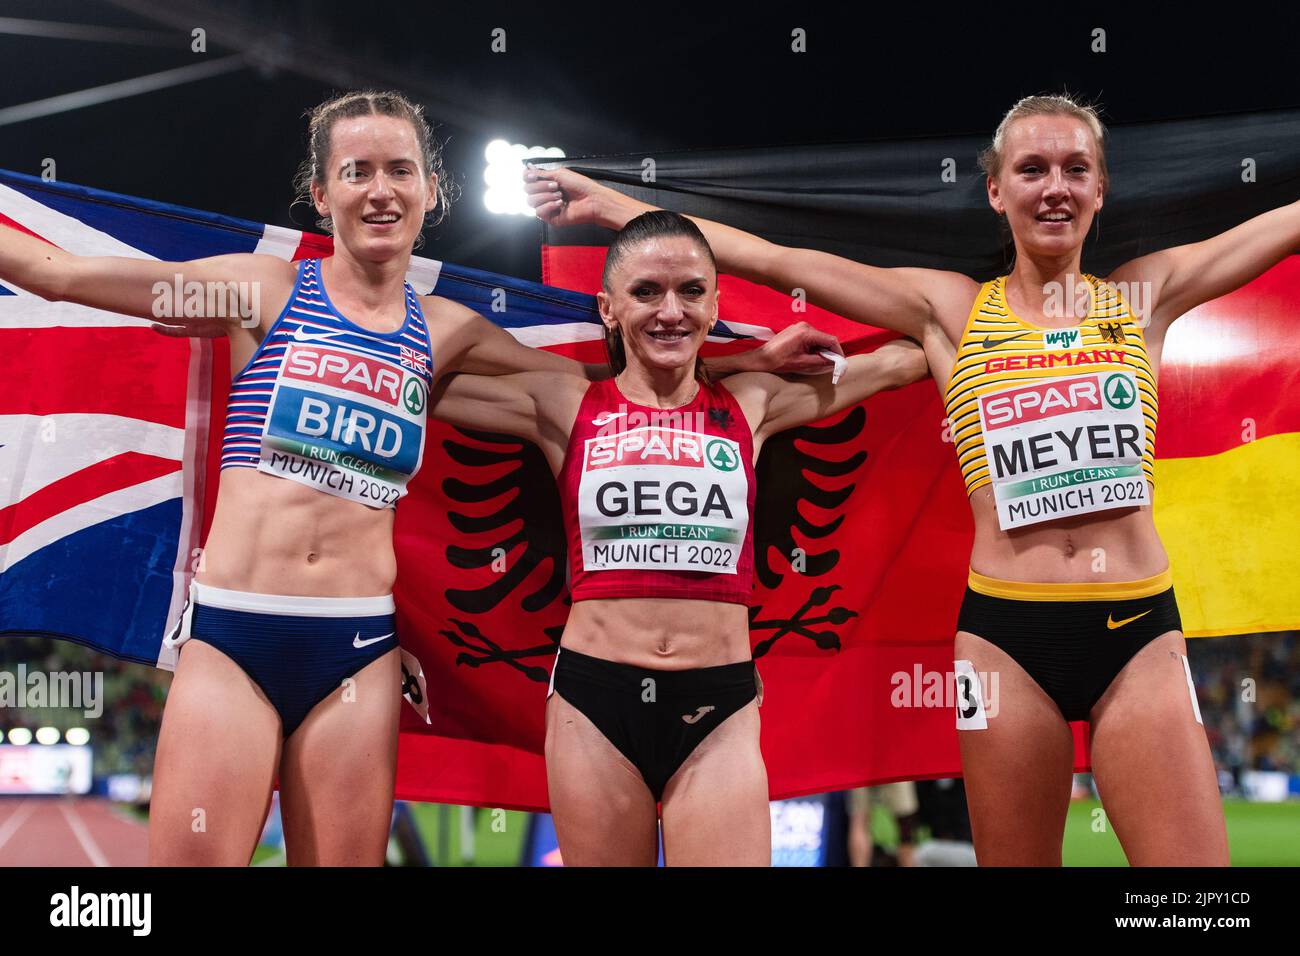 Albania's Luiza Gega (centre) celebrates winning the Women's 300m Steeplechase Final alongside Germany's Lea Meyer (right) who finished second and Great Britain's Elizabeth Bird who finished third during day ten of the European Championships 2022 in Munich, Germany. Picture date: Saturday August 20, 2022. Stock Photo